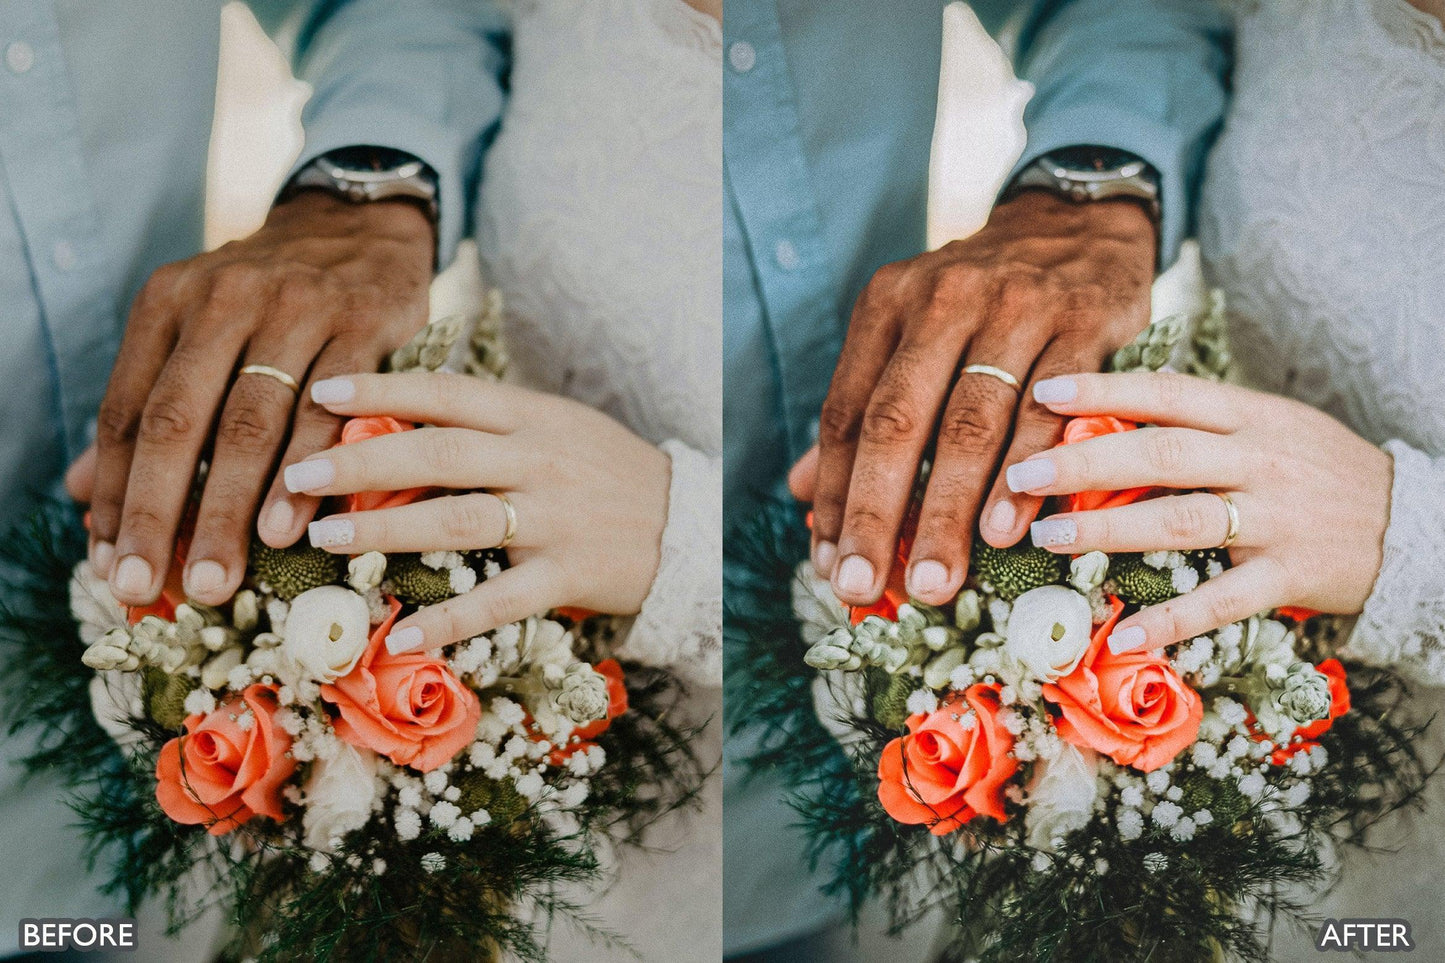 150 + Gorgeous Lightroom Presets for Wedding Photography - adobe lightroom presets, Blogger presets, Cinematic Presets, instagram presets, lightroom presets, Minimalist presets, moody presets, Portrait presets, presets before and after, professional lightroom presets, Wedding Lightroom Presets Bundle - aaapresets.com